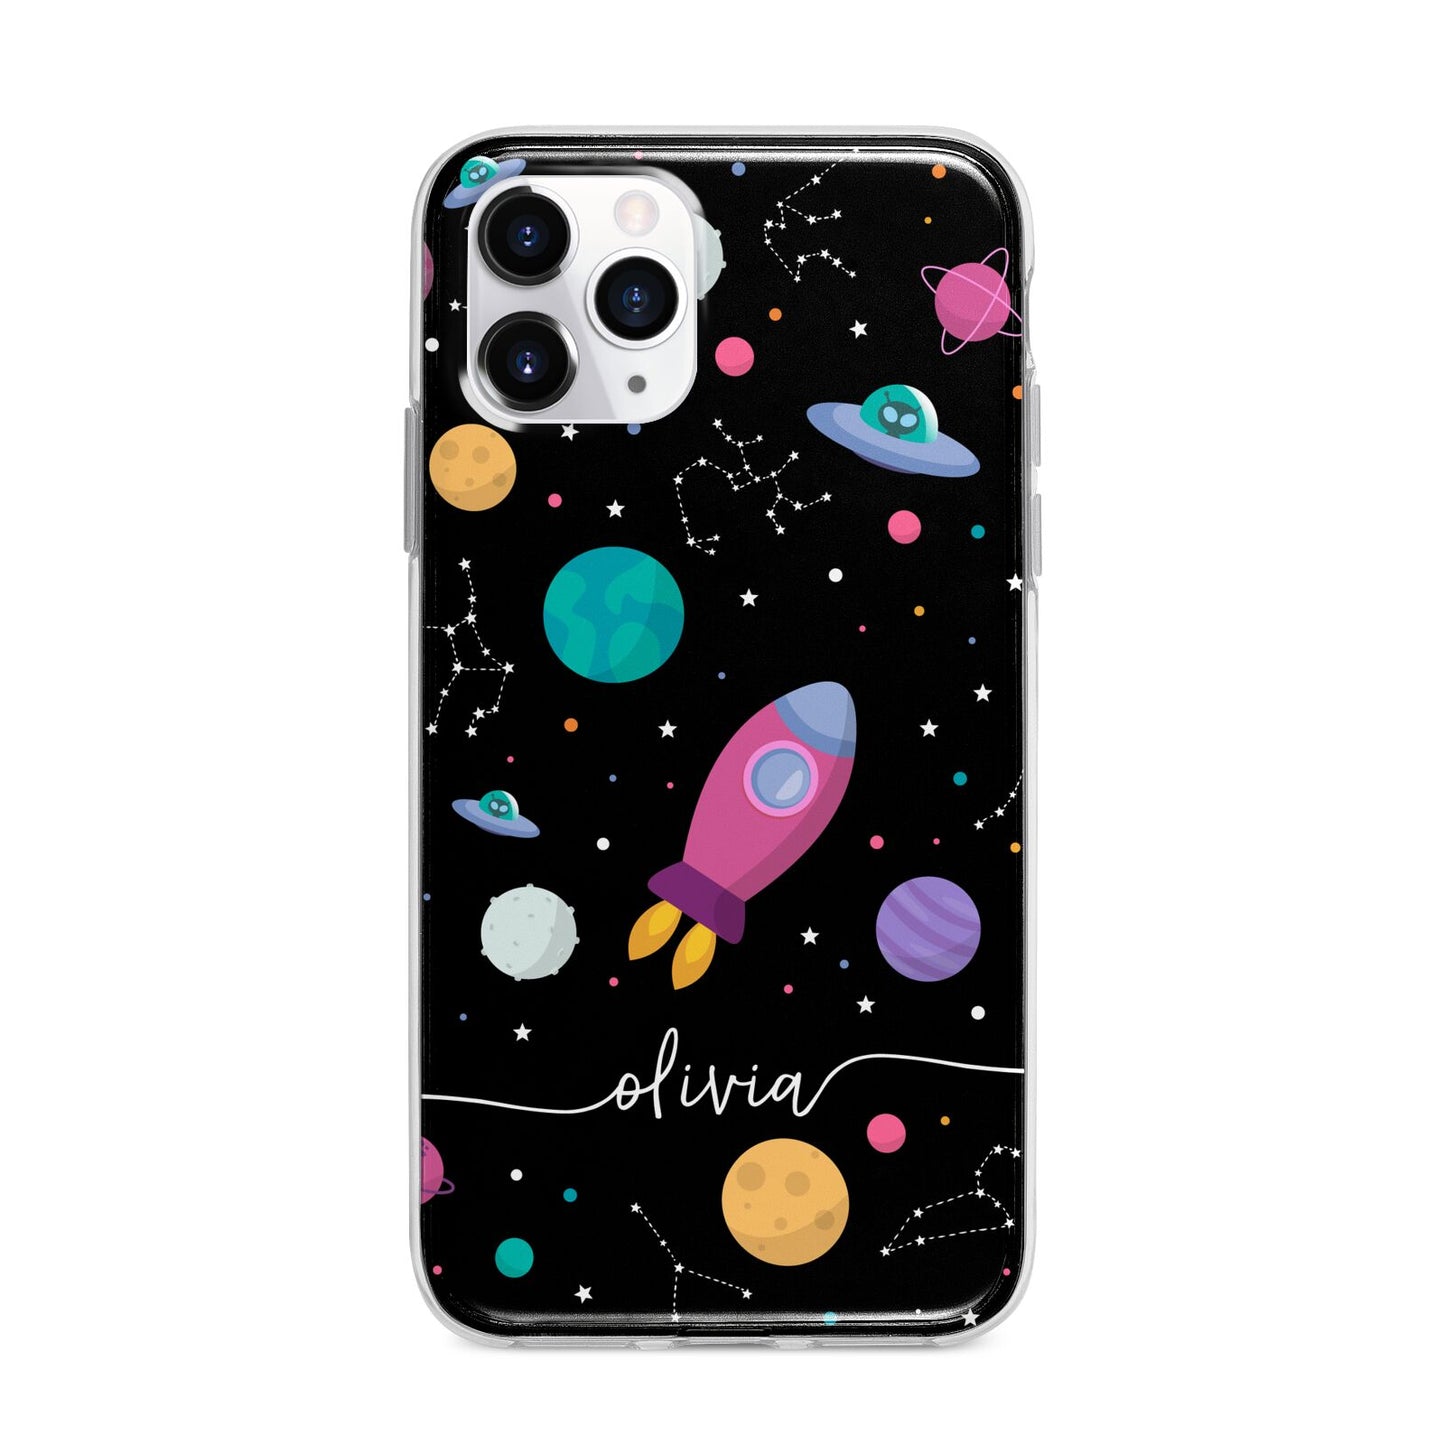 Galaxy Artwork with Name Apple iPhone 11 Pro Max in Silver with Bumper Case